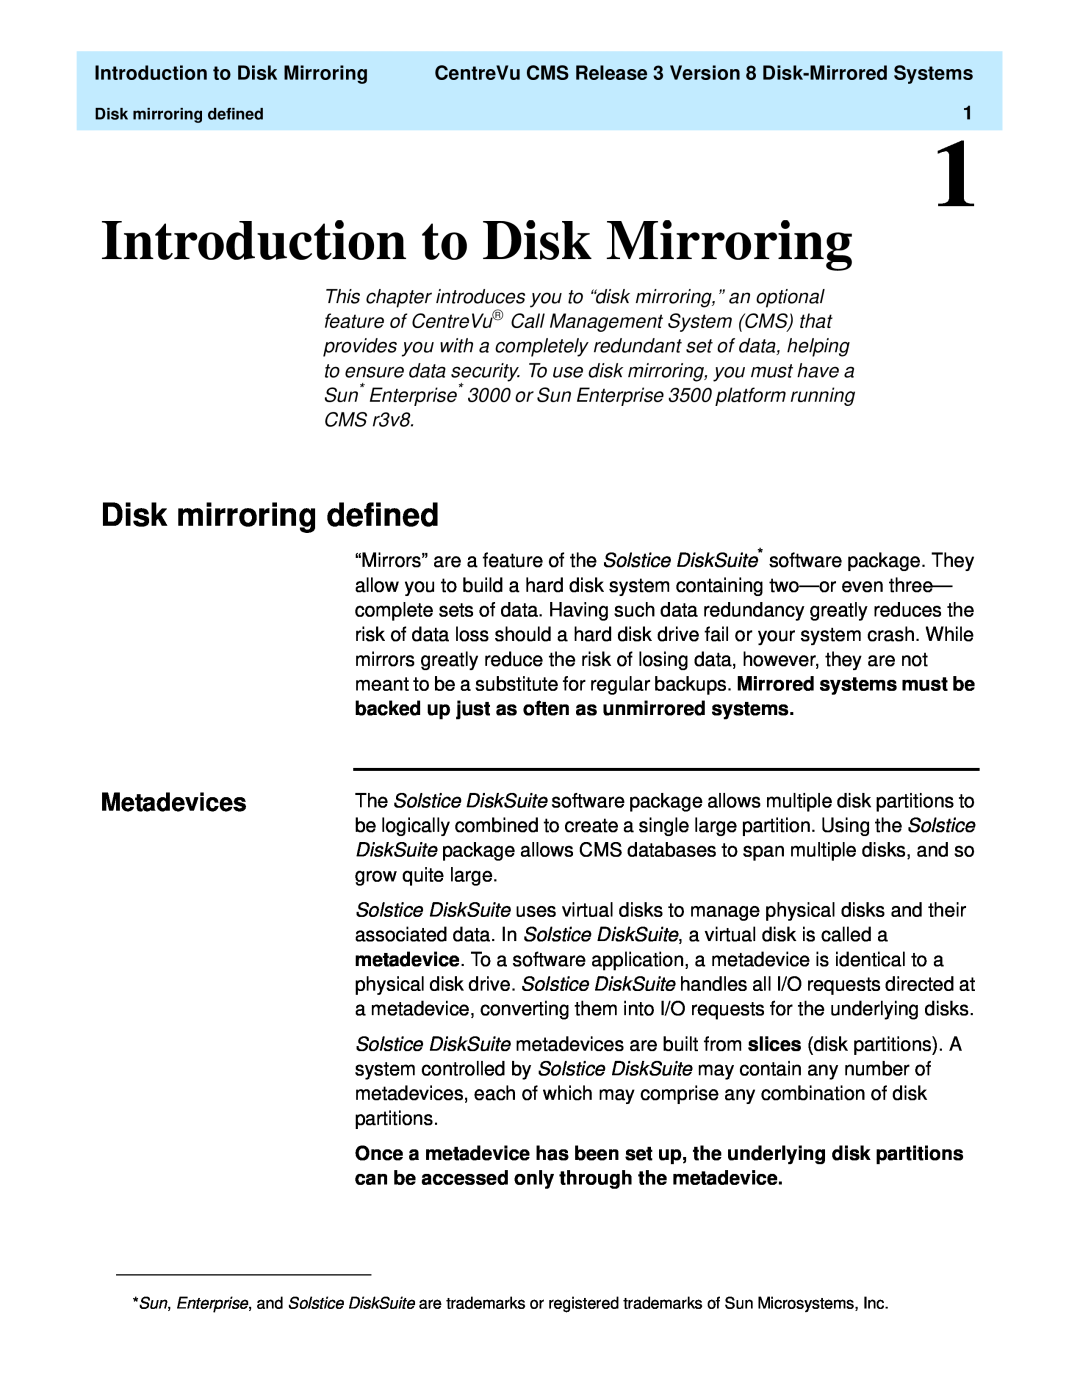 Lucent Technologies 585-210-940 manual Introduction to Disk Mirroring1, Disk mirroring defined, Metadevices 